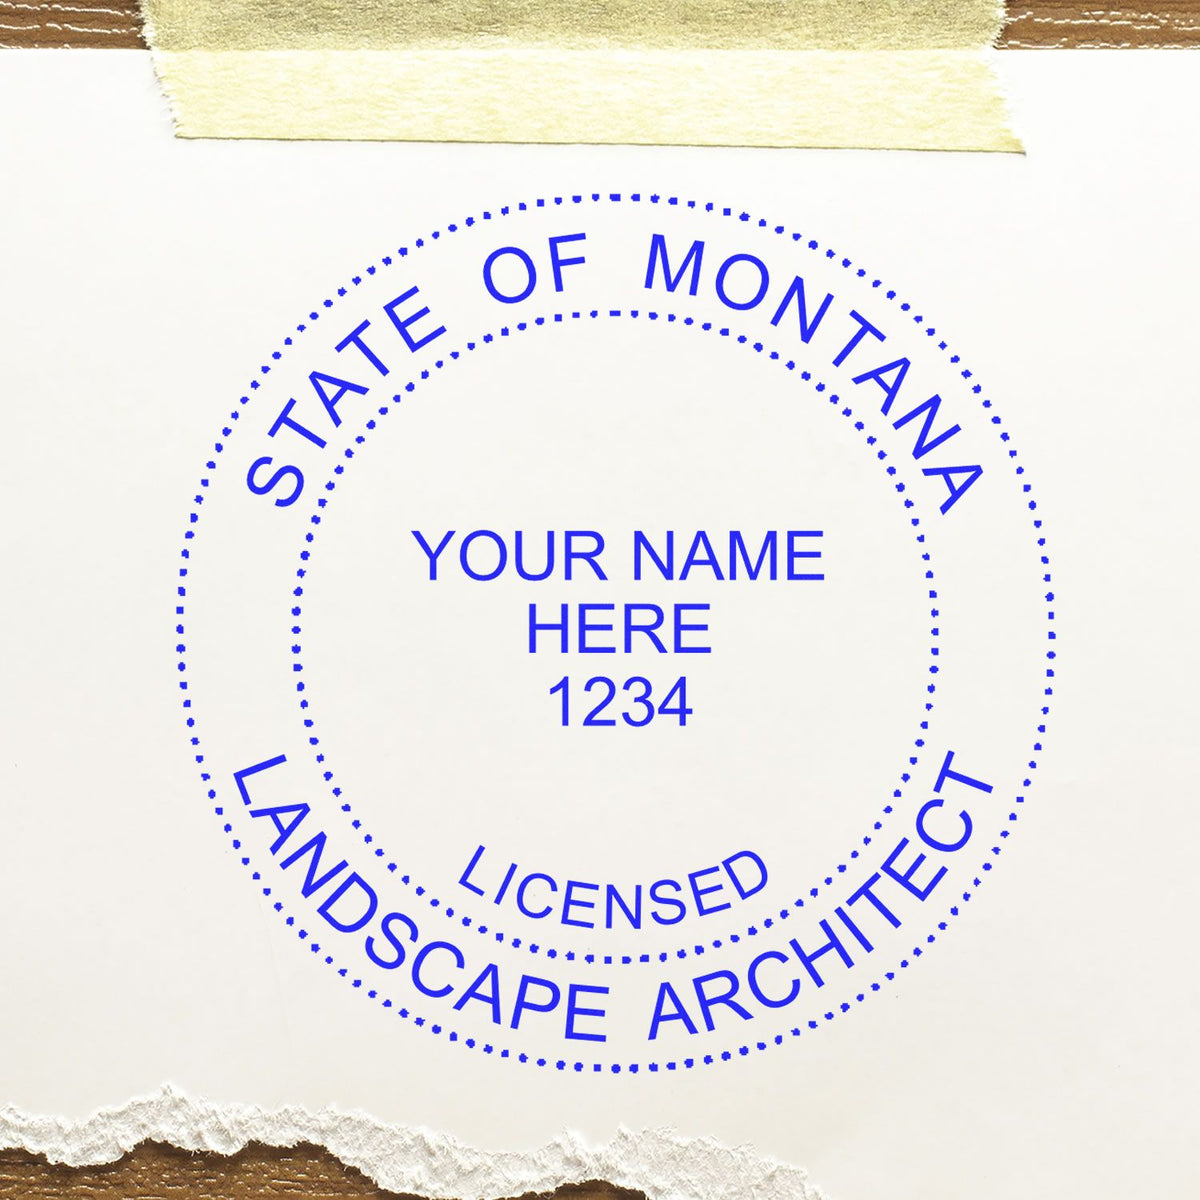 The Slim Pre-Inked Montana Landscape Architect Seal Stamp stamp impression comes to life with a crisp, detailed photo on paper - showcasing true professional quality.